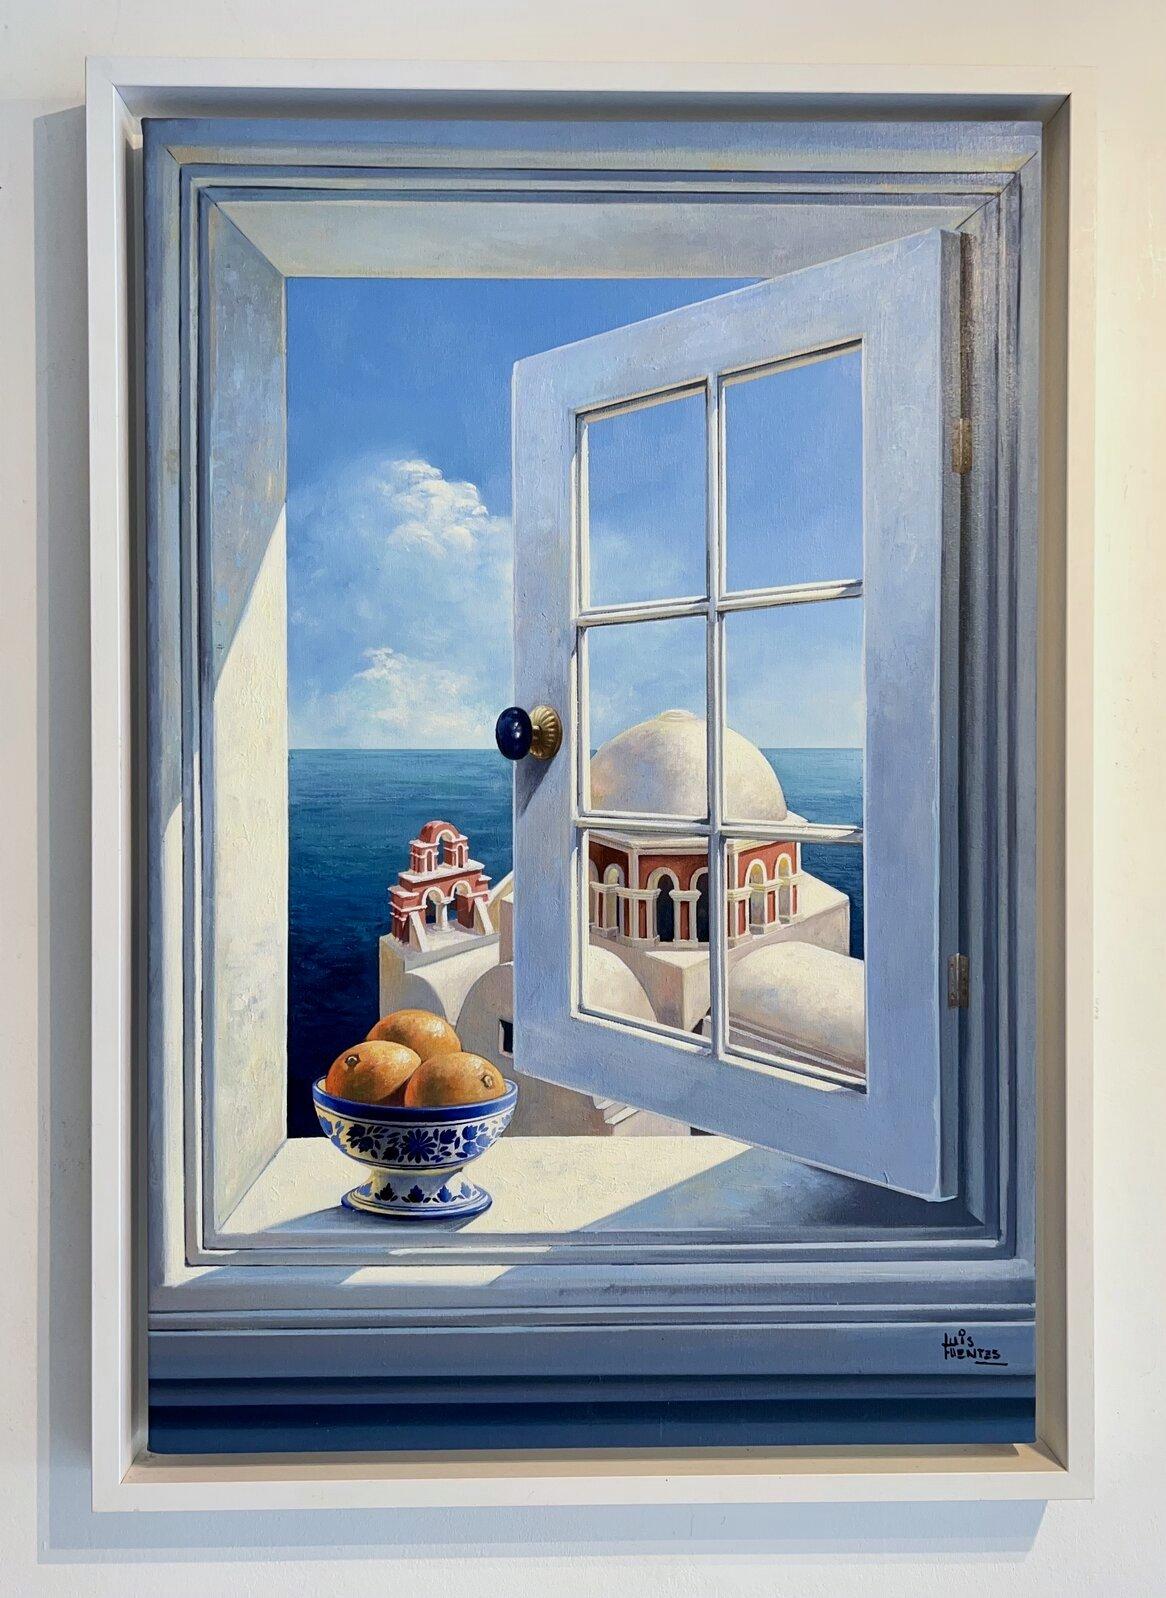 Blue Sky-original surreal realism seascape-architecture-still life  painting-Art - Painting by Luis Fuentes